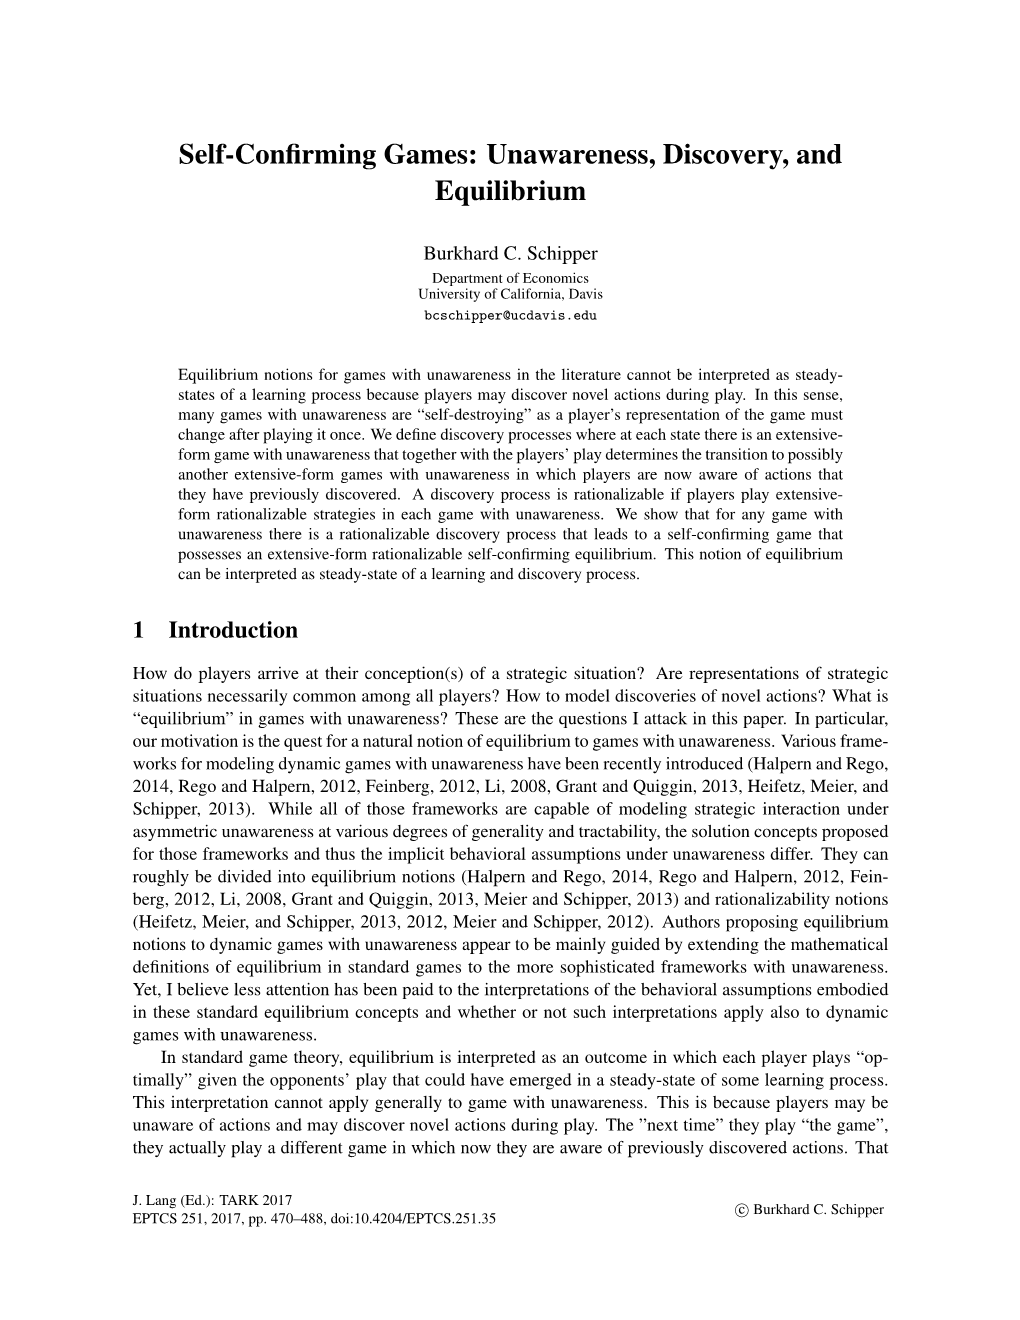 Self-Confirming Games: Unawareness, Discovery, and Equilibrium